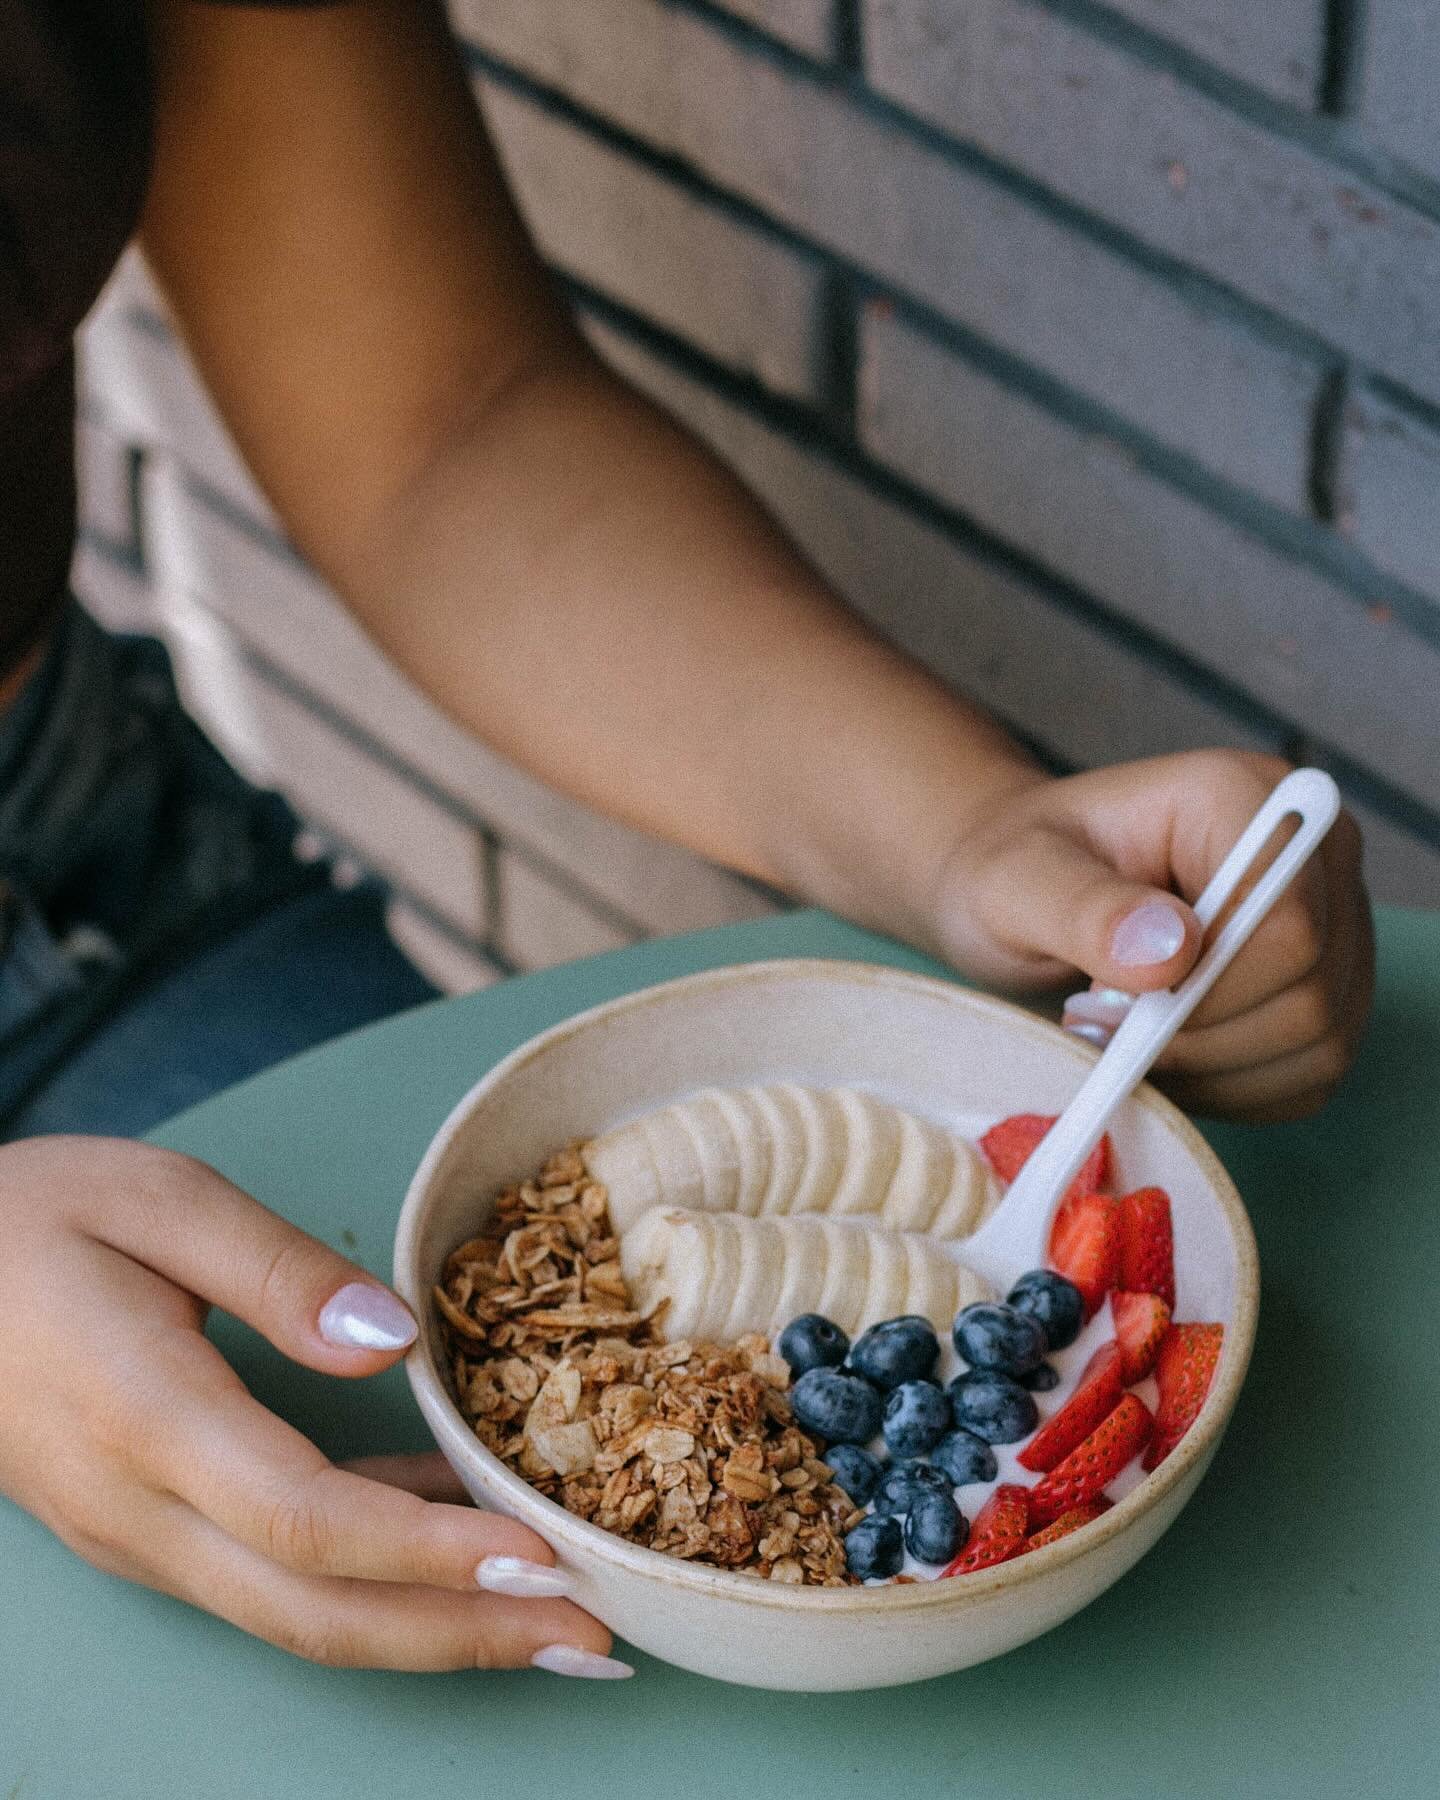 You knew we had parfait bowls right?!😍✨
&nbsp;
If not, here is your formal introduction!! Made with delicious layers of our creamy cashew yogurt, fresh seasonal fruits, crunchy granola, and so many other toppings of your choice! 🍓🍌🥝 On our menu w